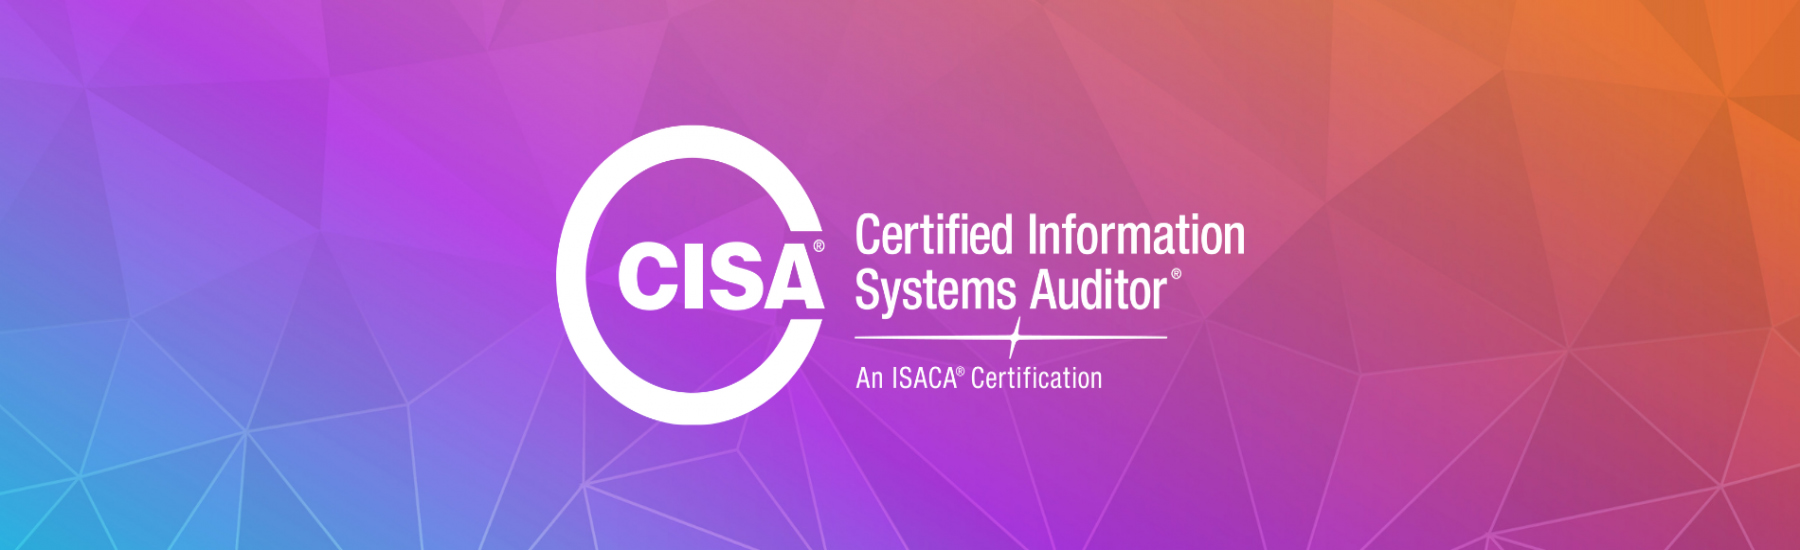 Certified Information System Auditor